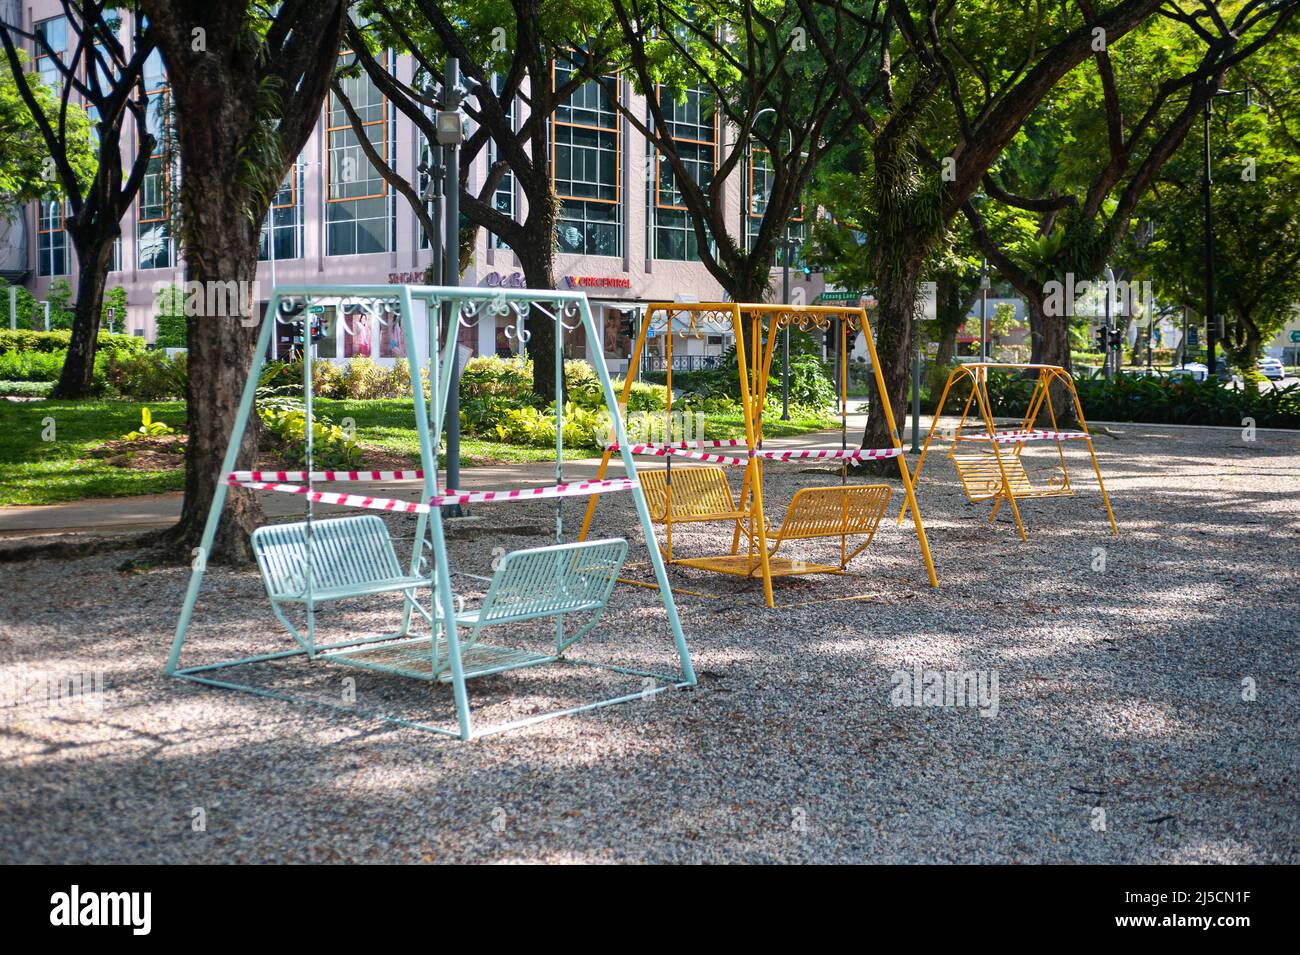 May 28, 2020, Singapore, Republic of Singapore, Asia - Swings in a small park in Dhoby Ghaut have been cordoned off with red and white barrier tape during curfews amid the Corona crisis to halt the spread of the pandemic coronavirus (Covid-19). Other precautionary measures were introduced in public life, such as the closure of all non-essential shops and retailers, as well as all schools until June 1. [automated translation] Stock Photo